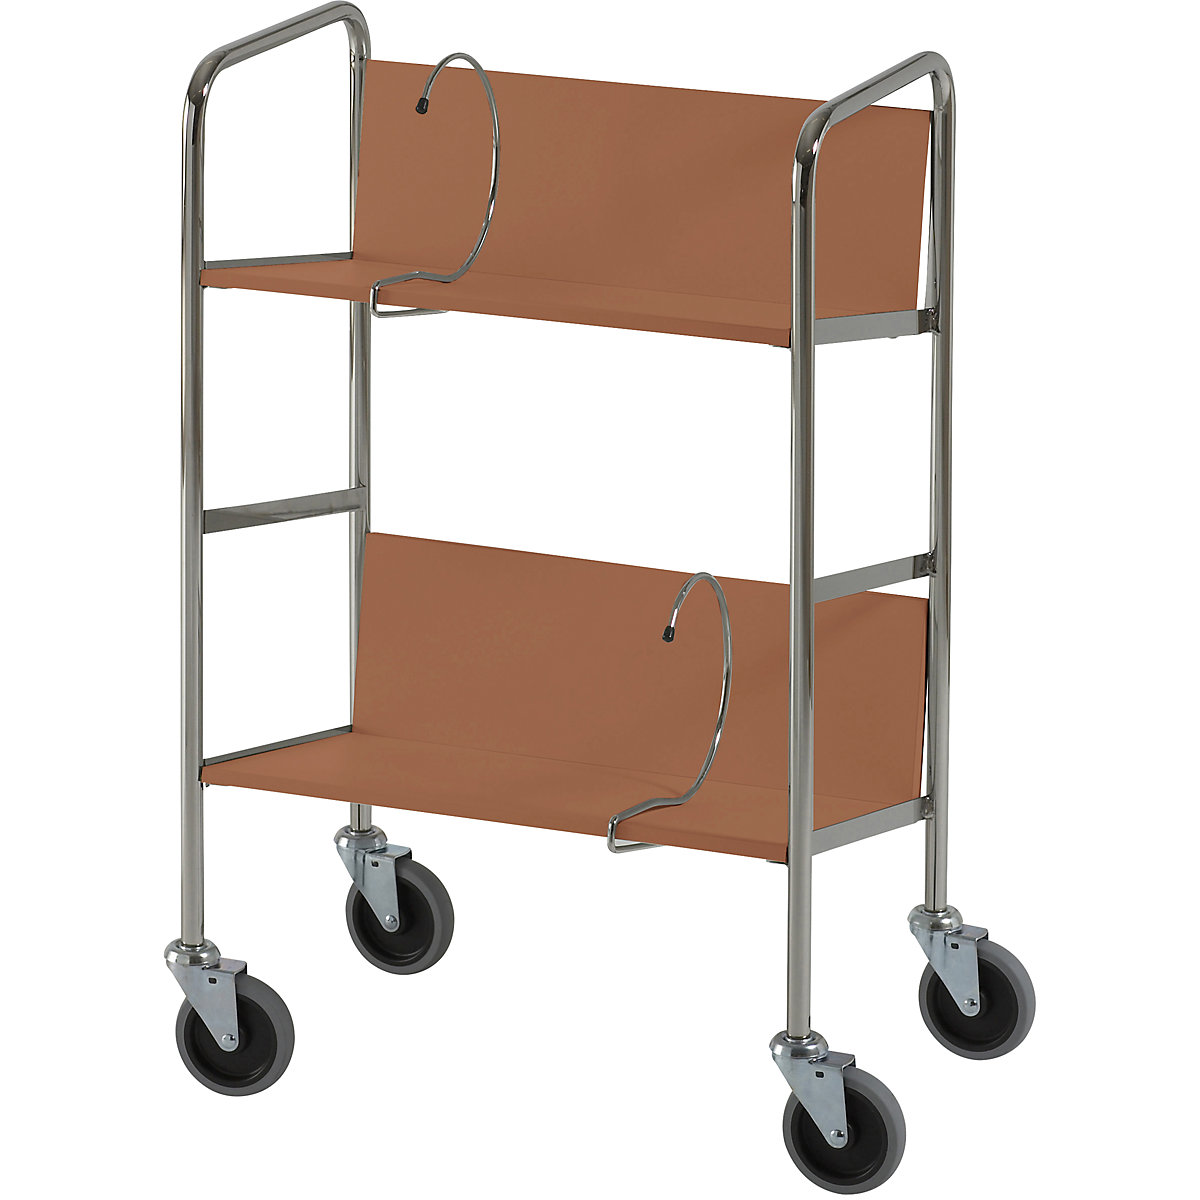 File trolley, chrome plated – HelgeNyberg, 2 shelves, LxWxH 550 x 340 x 840 mm, cherry finish, 5+ items-26